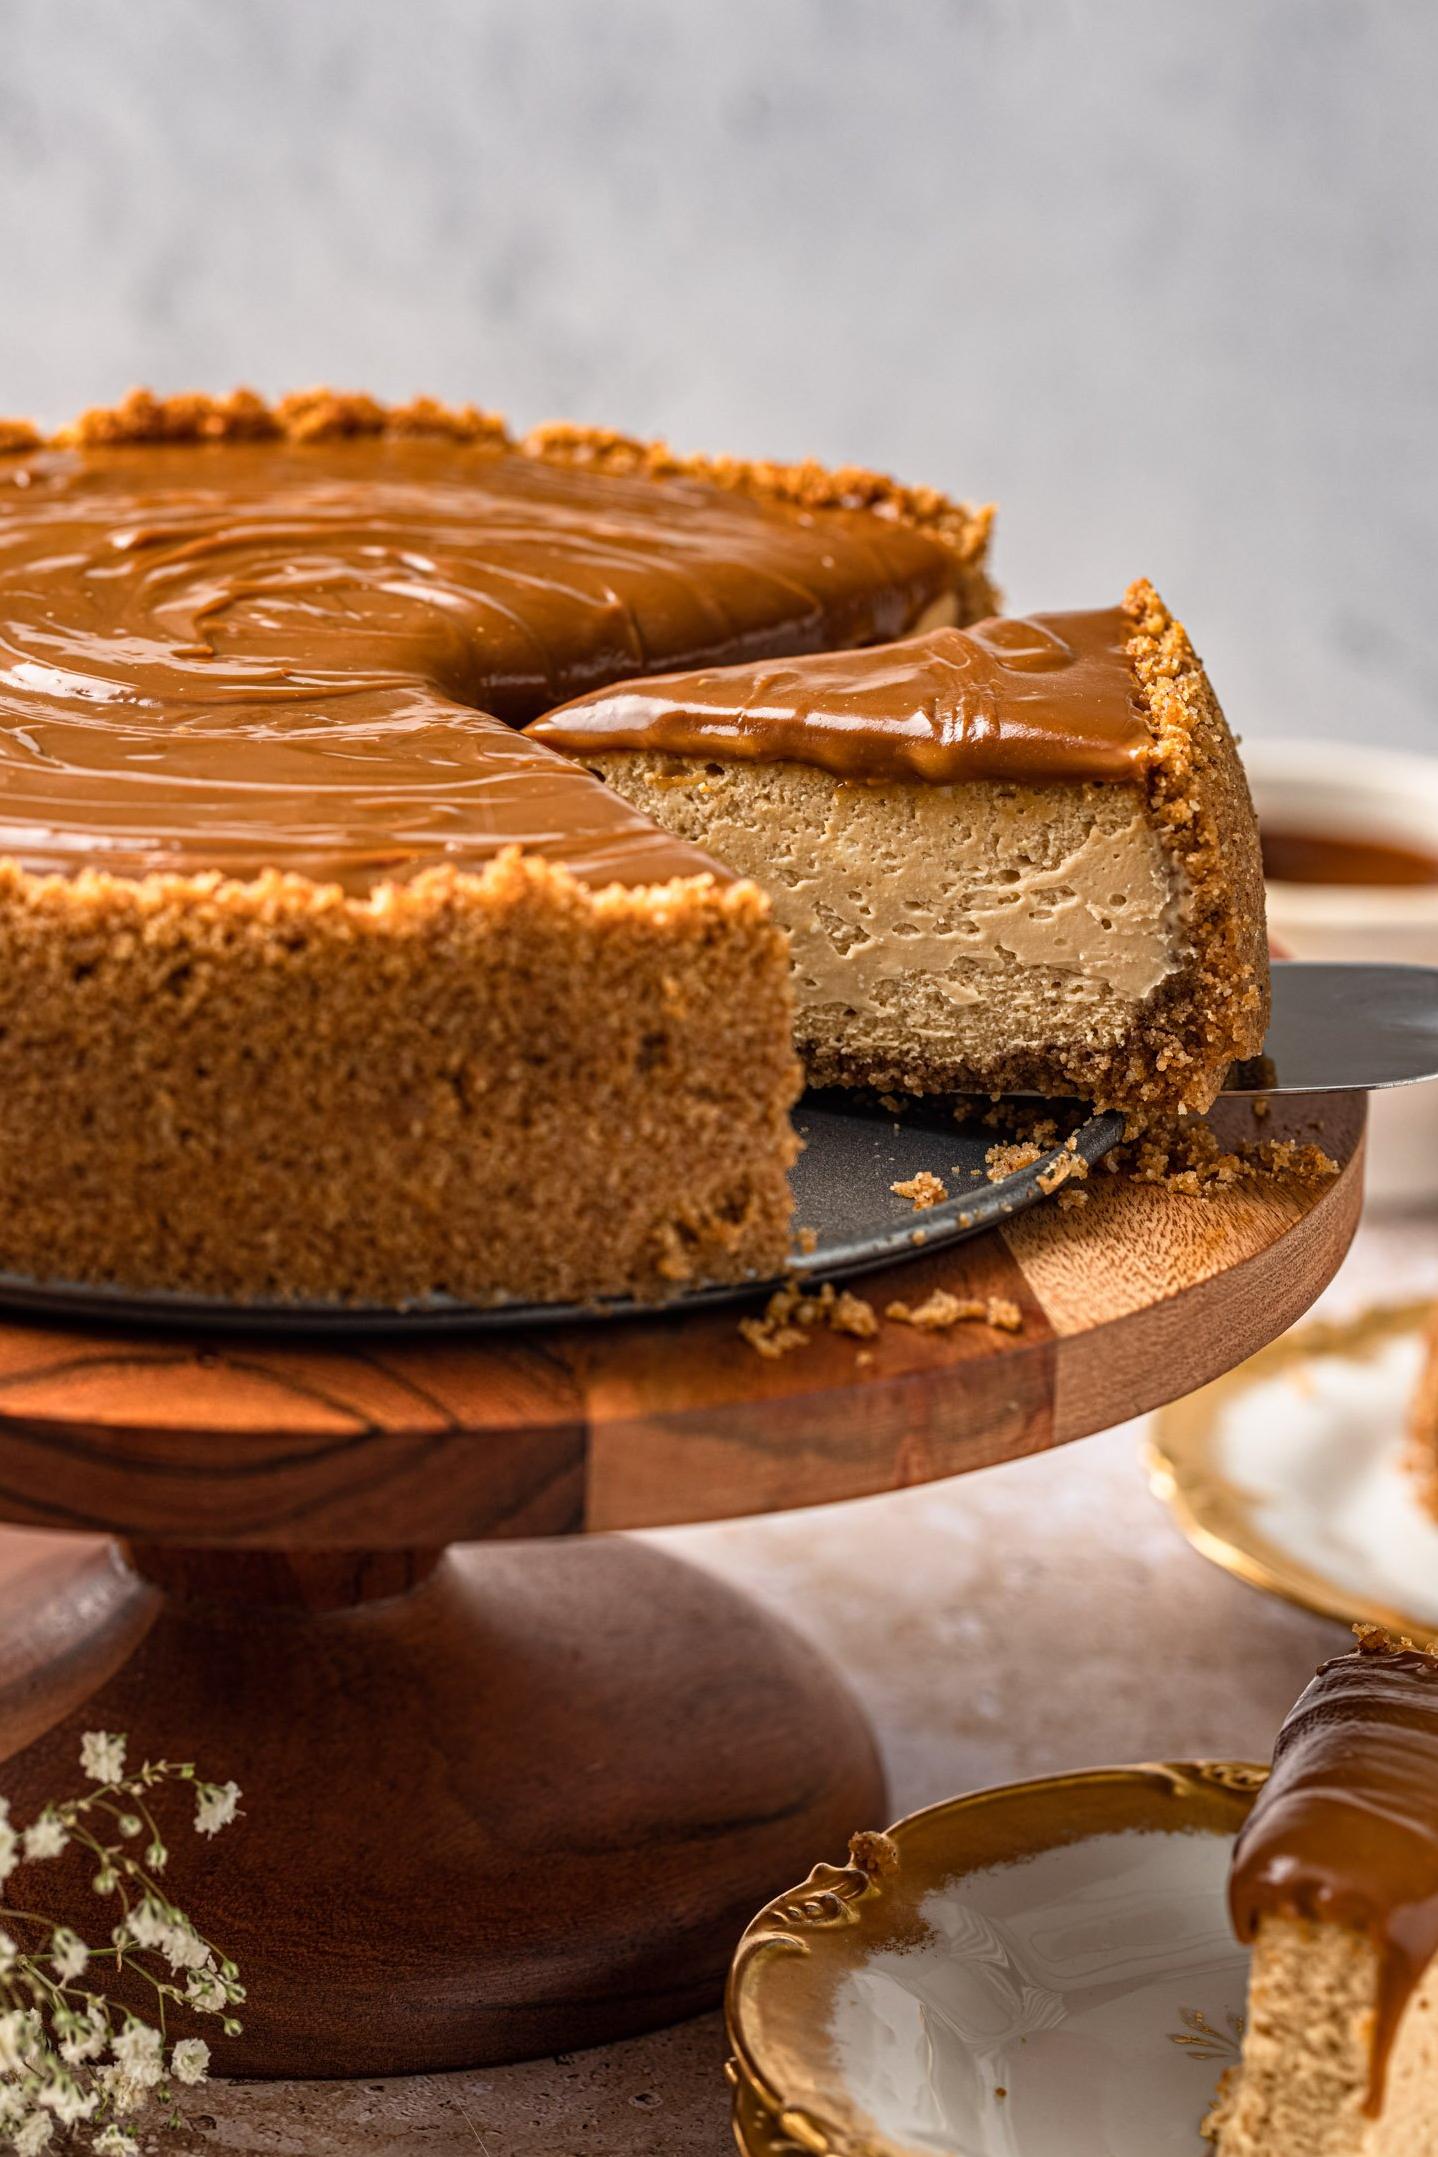  Get ready to fall in love with this heavenly Cuban Dulce de Leche Cheesecake